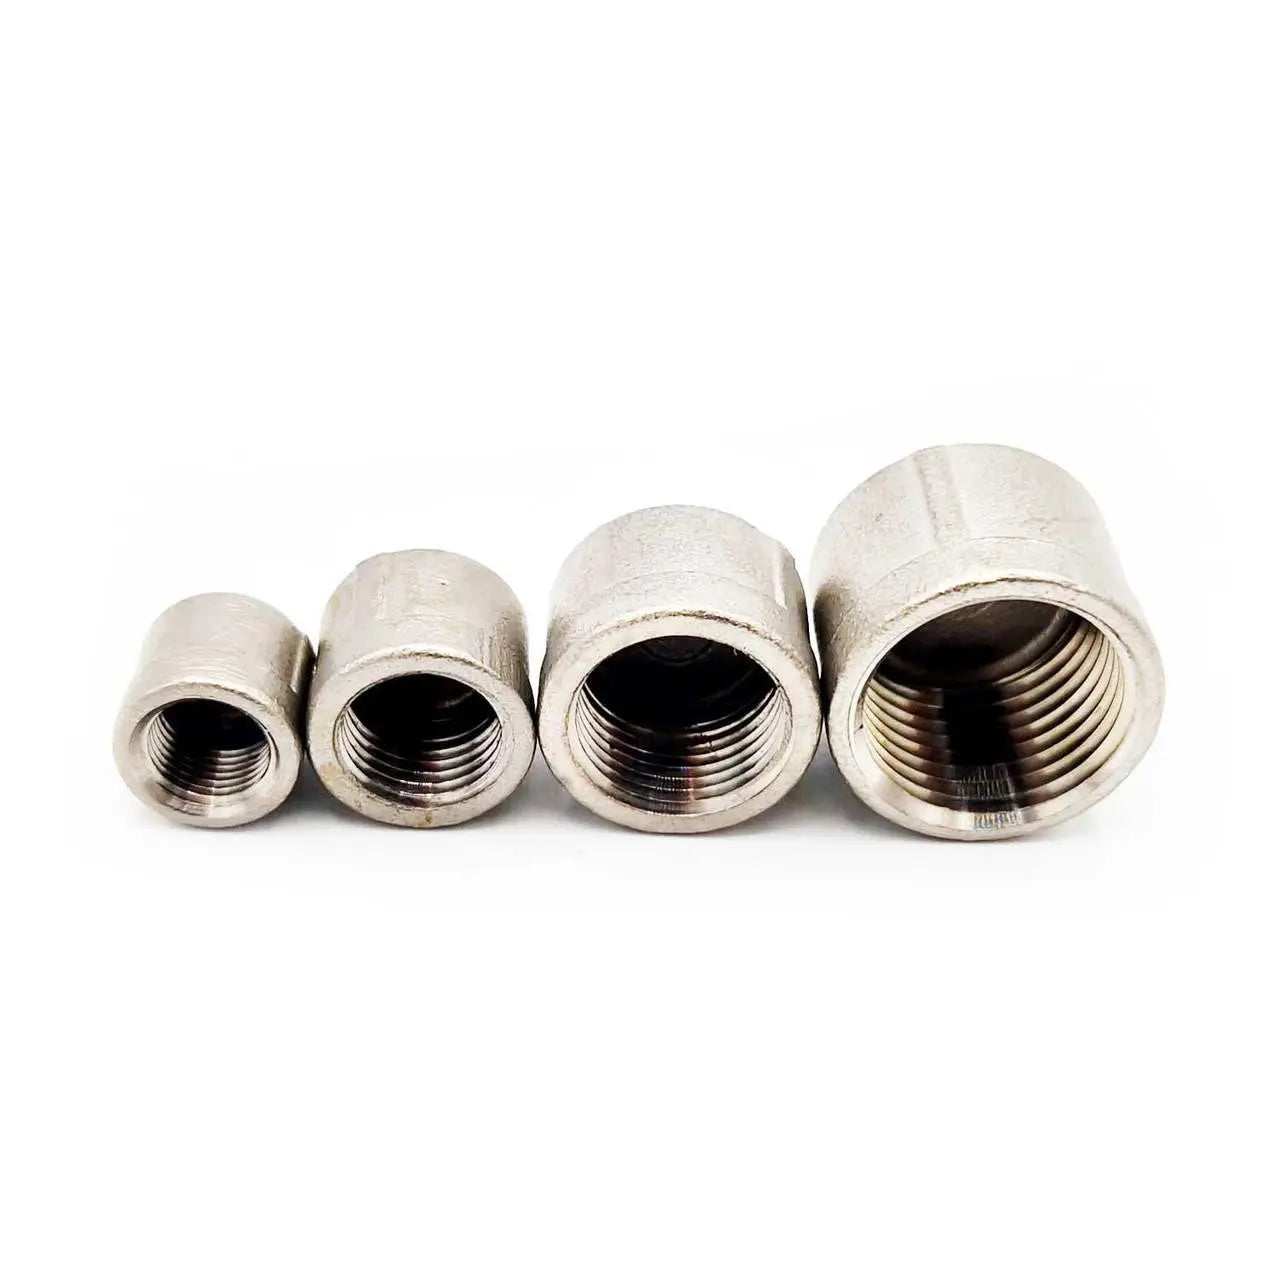 Threaded Female Pipe End Blanking Cap 316 Stainless Steel Blanking Plugs and Caps